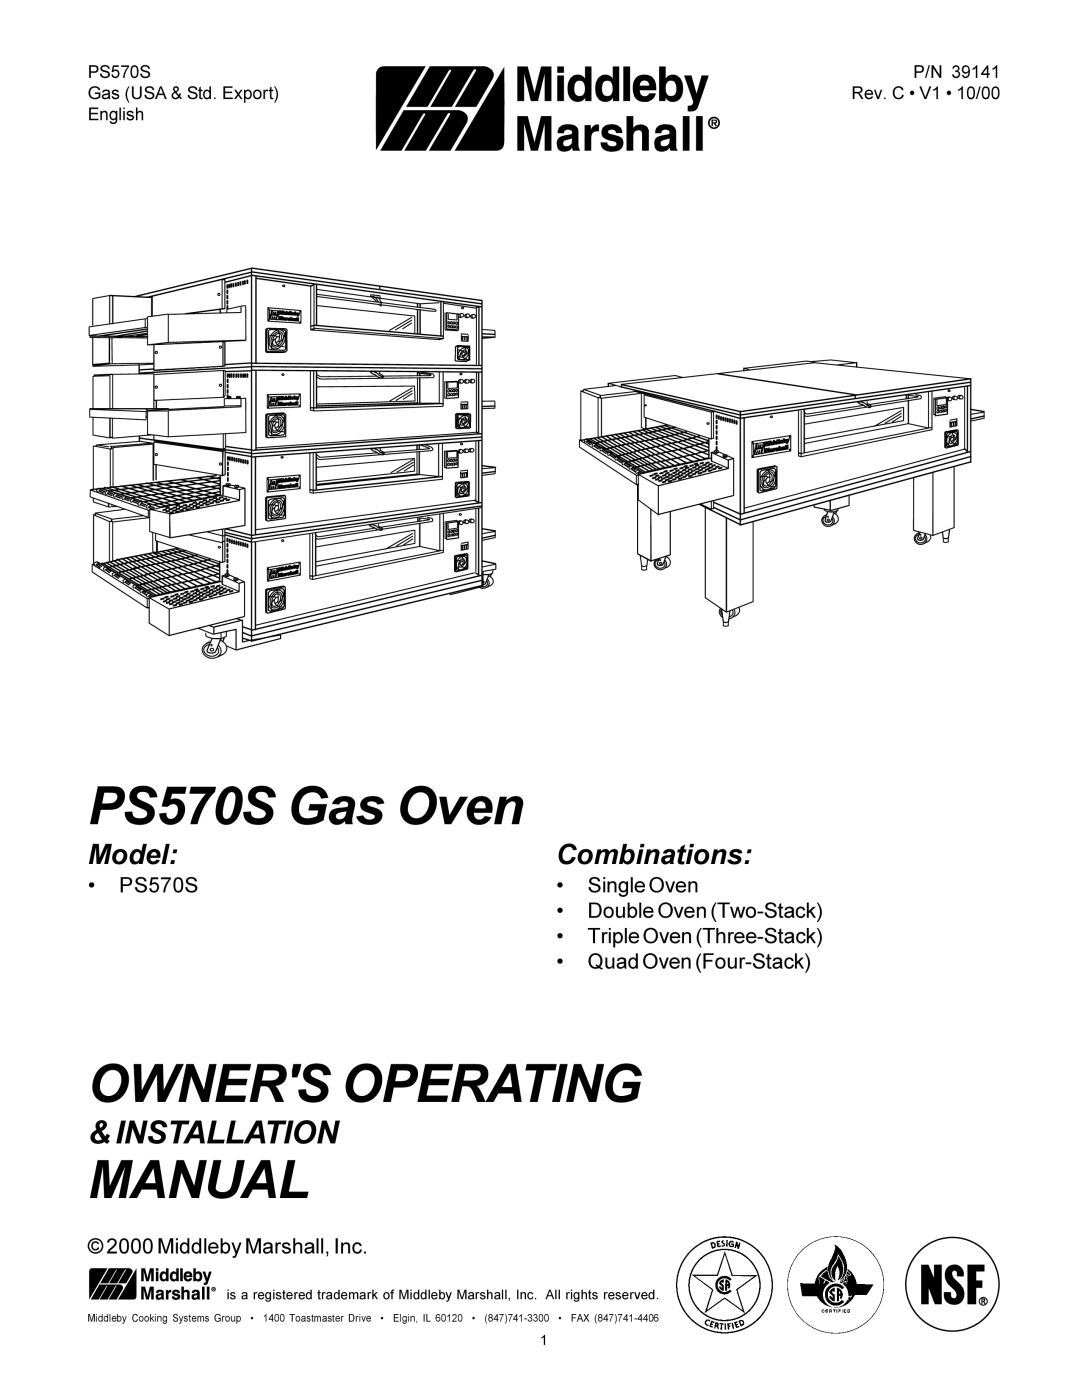 Middleby Marshall installation manual Model, Combinations, PS570S Gas Oven, Owners Operating, Manual, Installation 